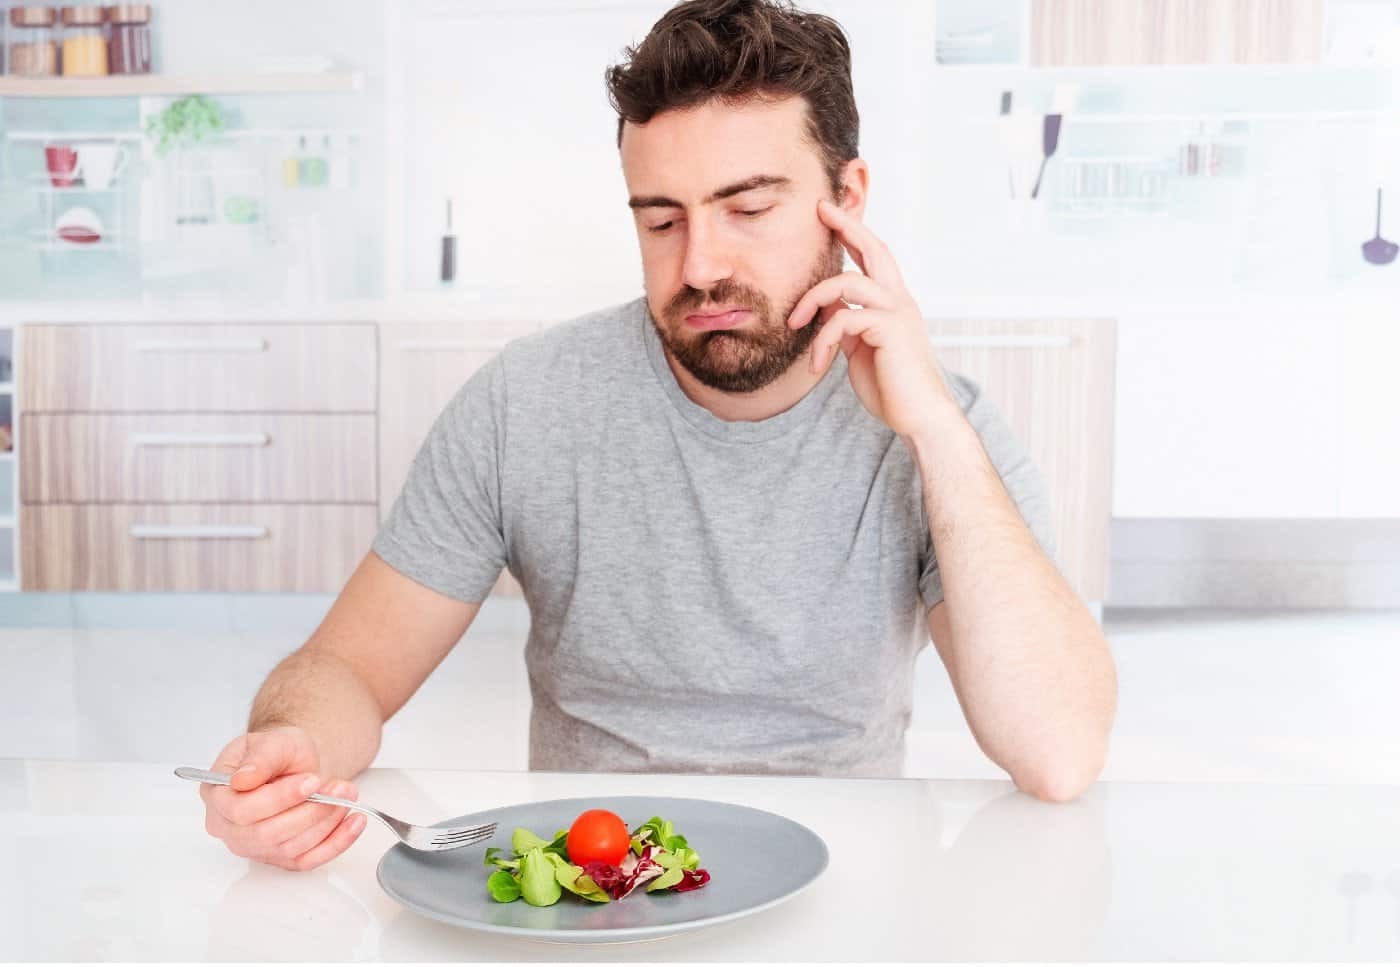 Food Boredom May Lead to Weight Loss: How True?